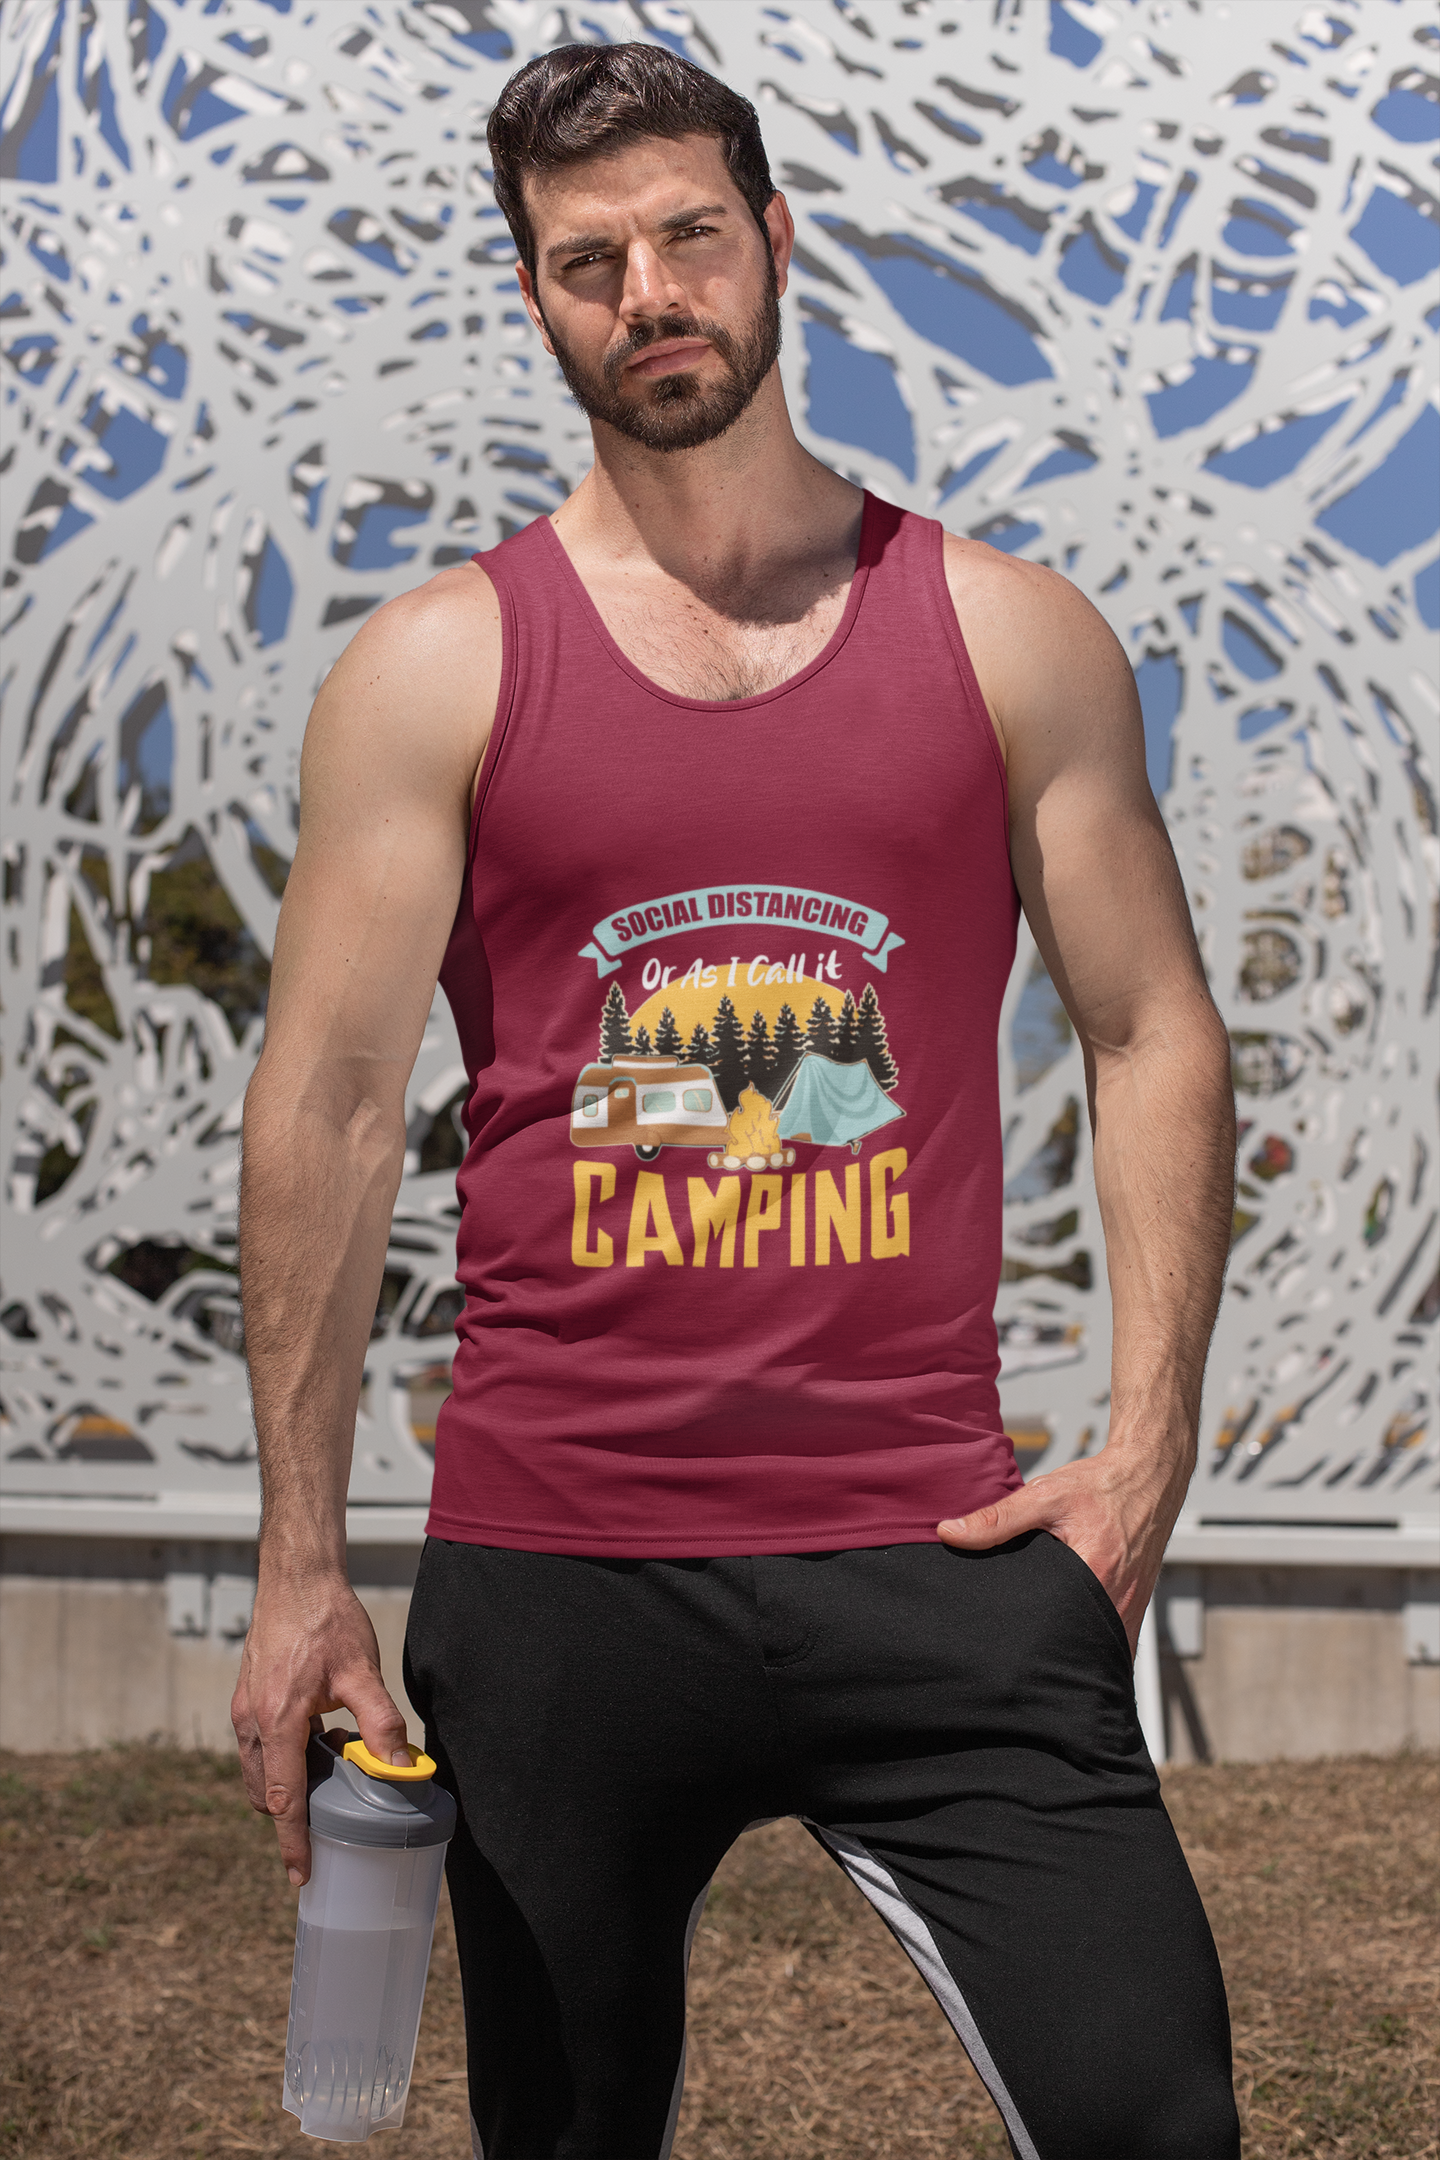 Social distancing or as i call it camping; 100% cotton tank top. Removable tag for comfort